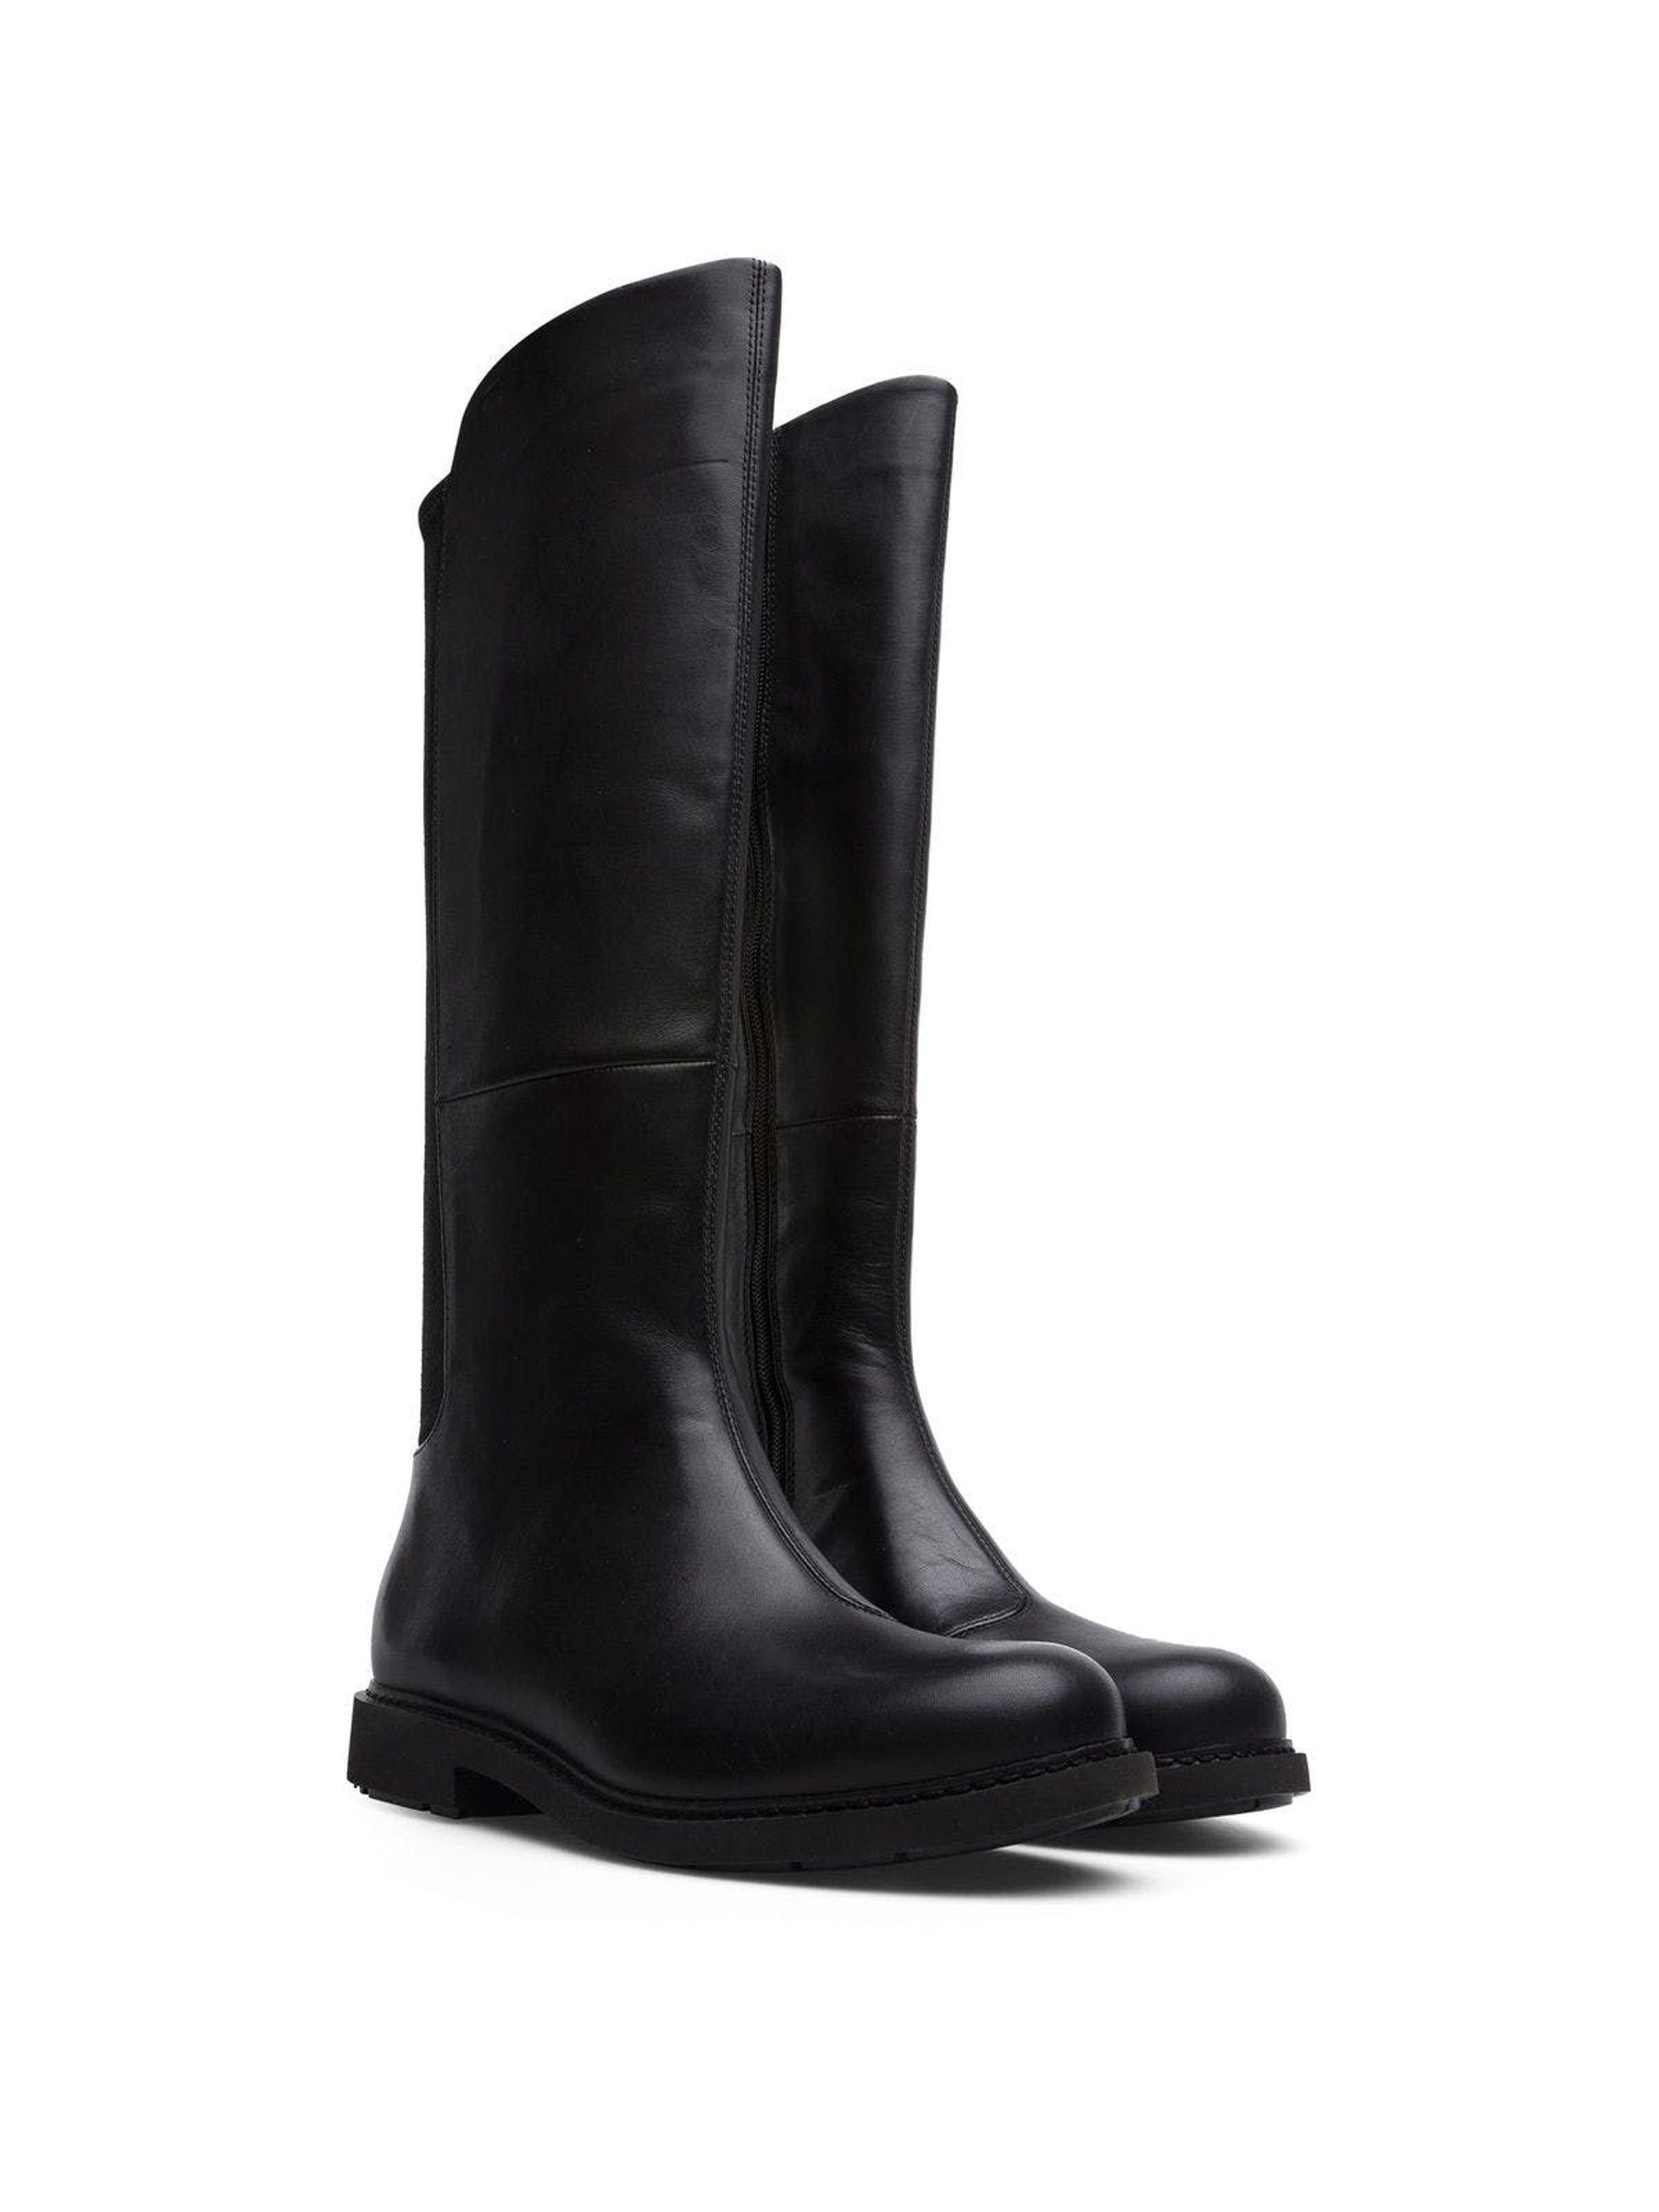 Camper Neuman Leather Knee-high Boot in Black | Lyst